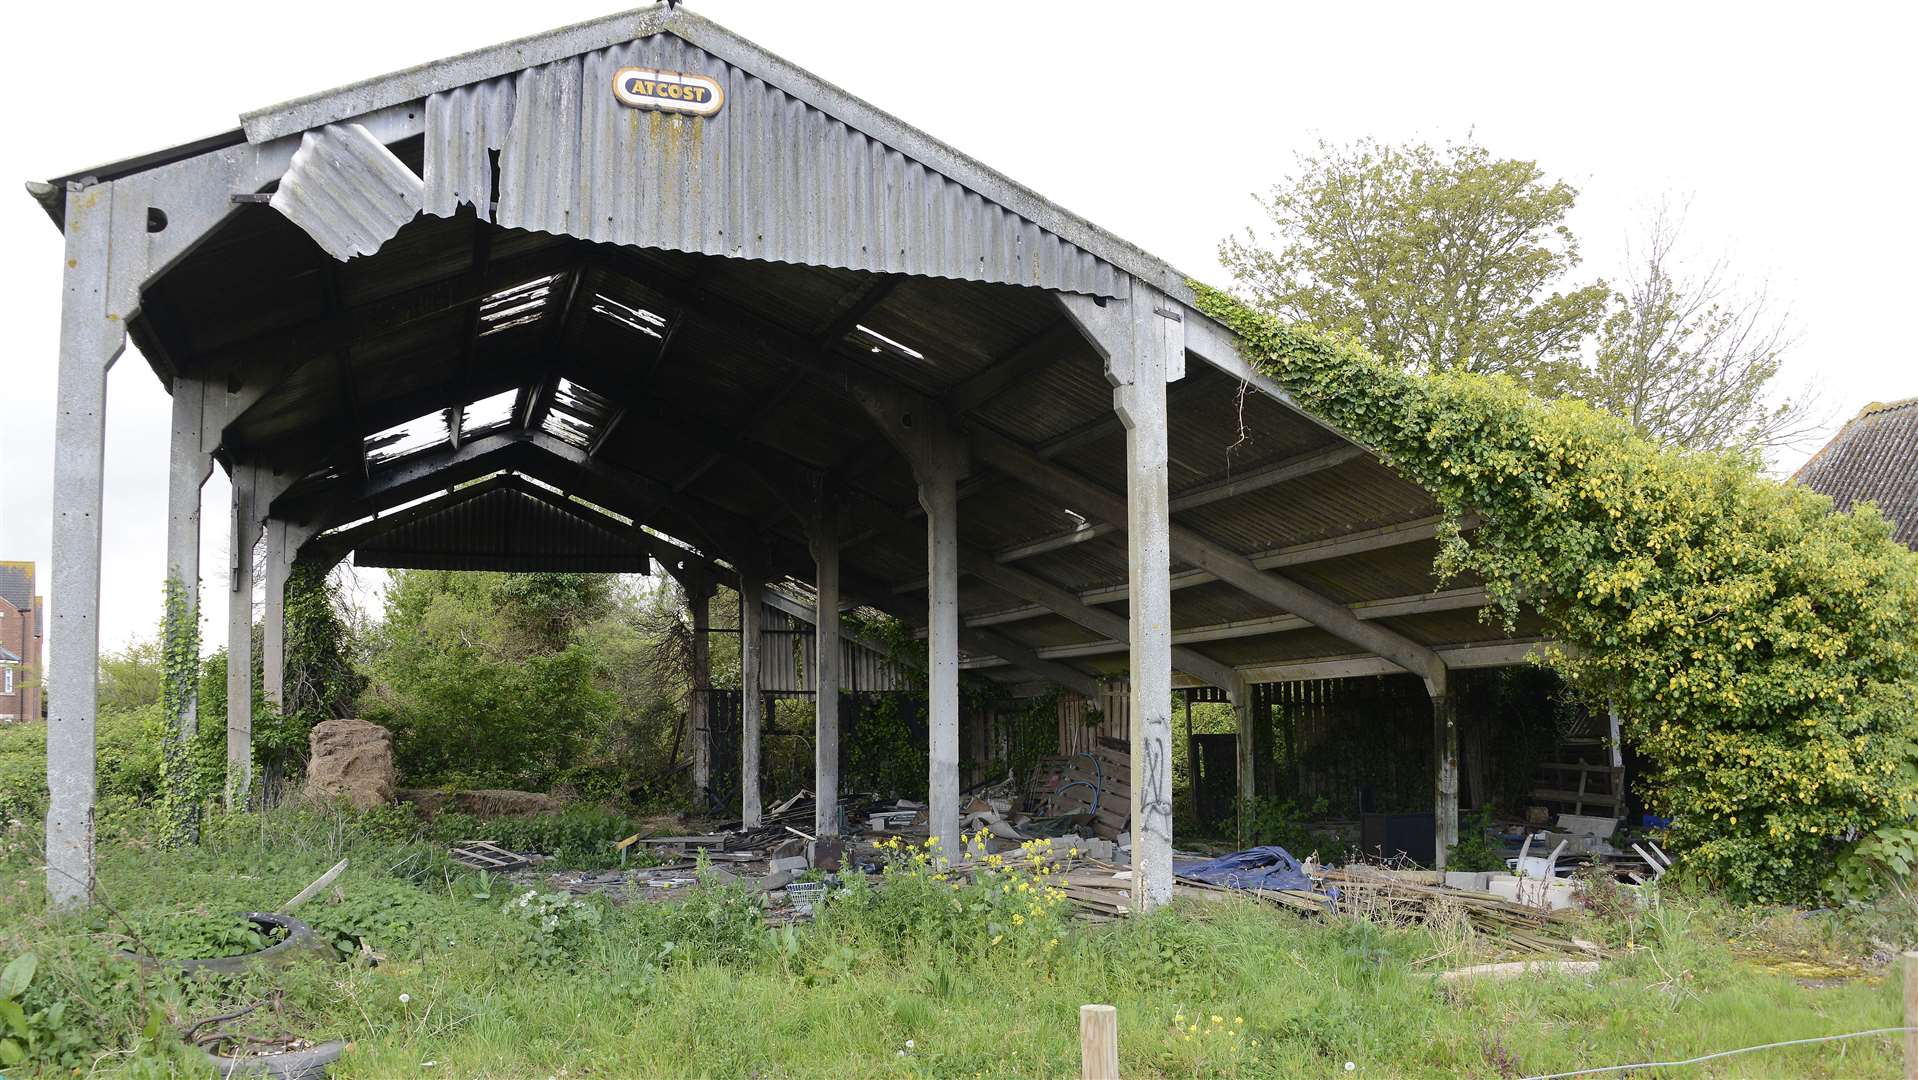 One of the derelict buildings currently standing at Blacksole Farm in Herne Bay